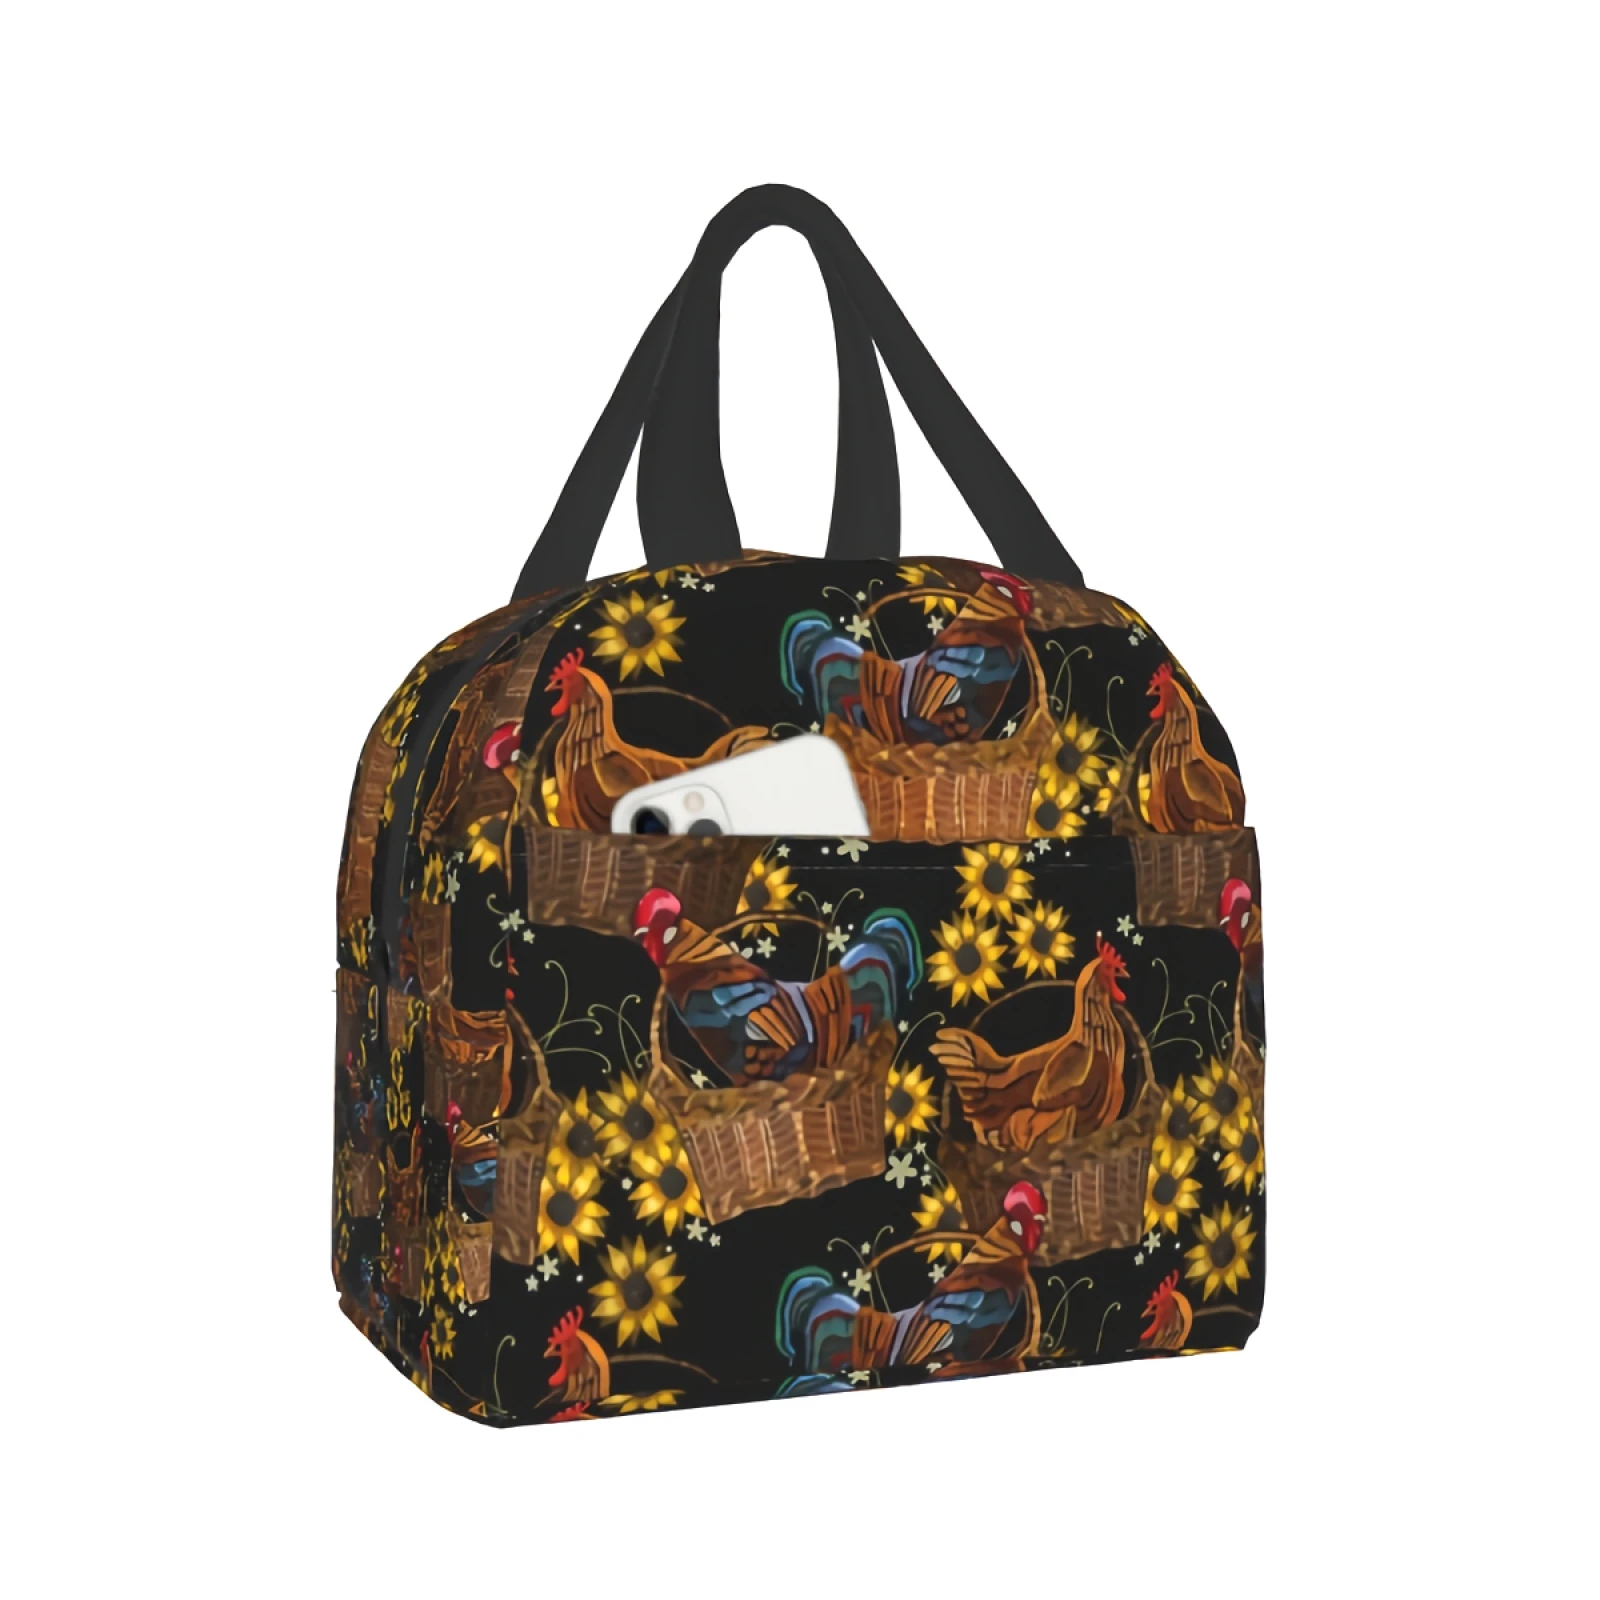 

Chicken Rooster Sunflowers Portable Insulated Lunch Bag Waterproof Watercolor Spring Yellow Flower Tote Bento Bag Lunch Tote